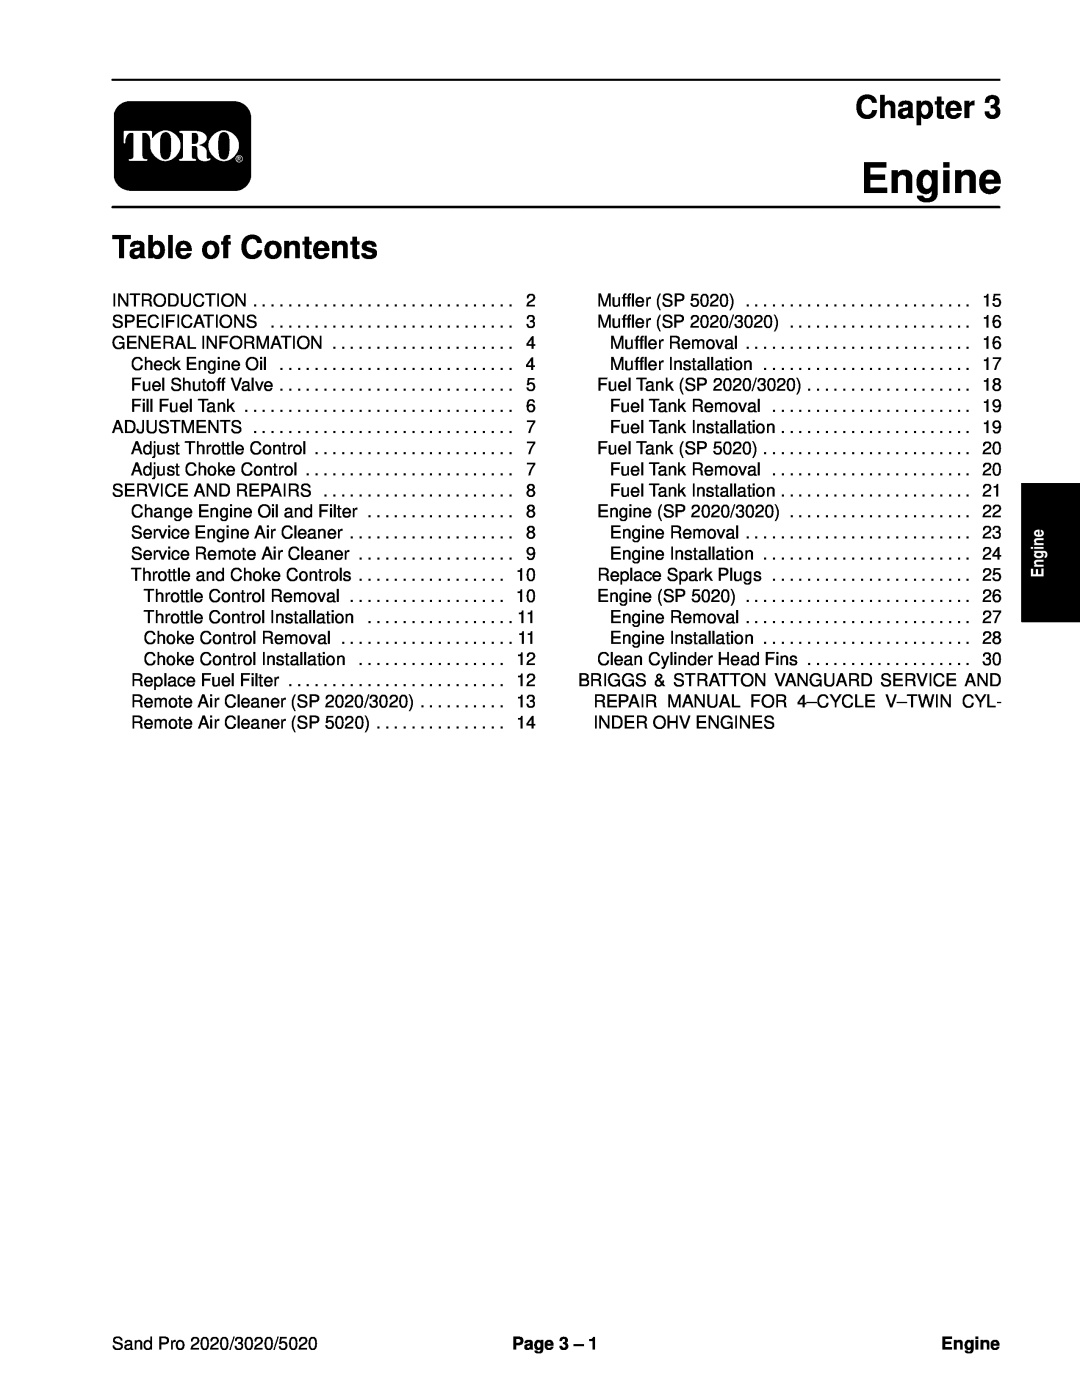 Toro service manual Engine, Chapter, Table of Contents, Sand Pro 2020/3020/5020, Page 3 